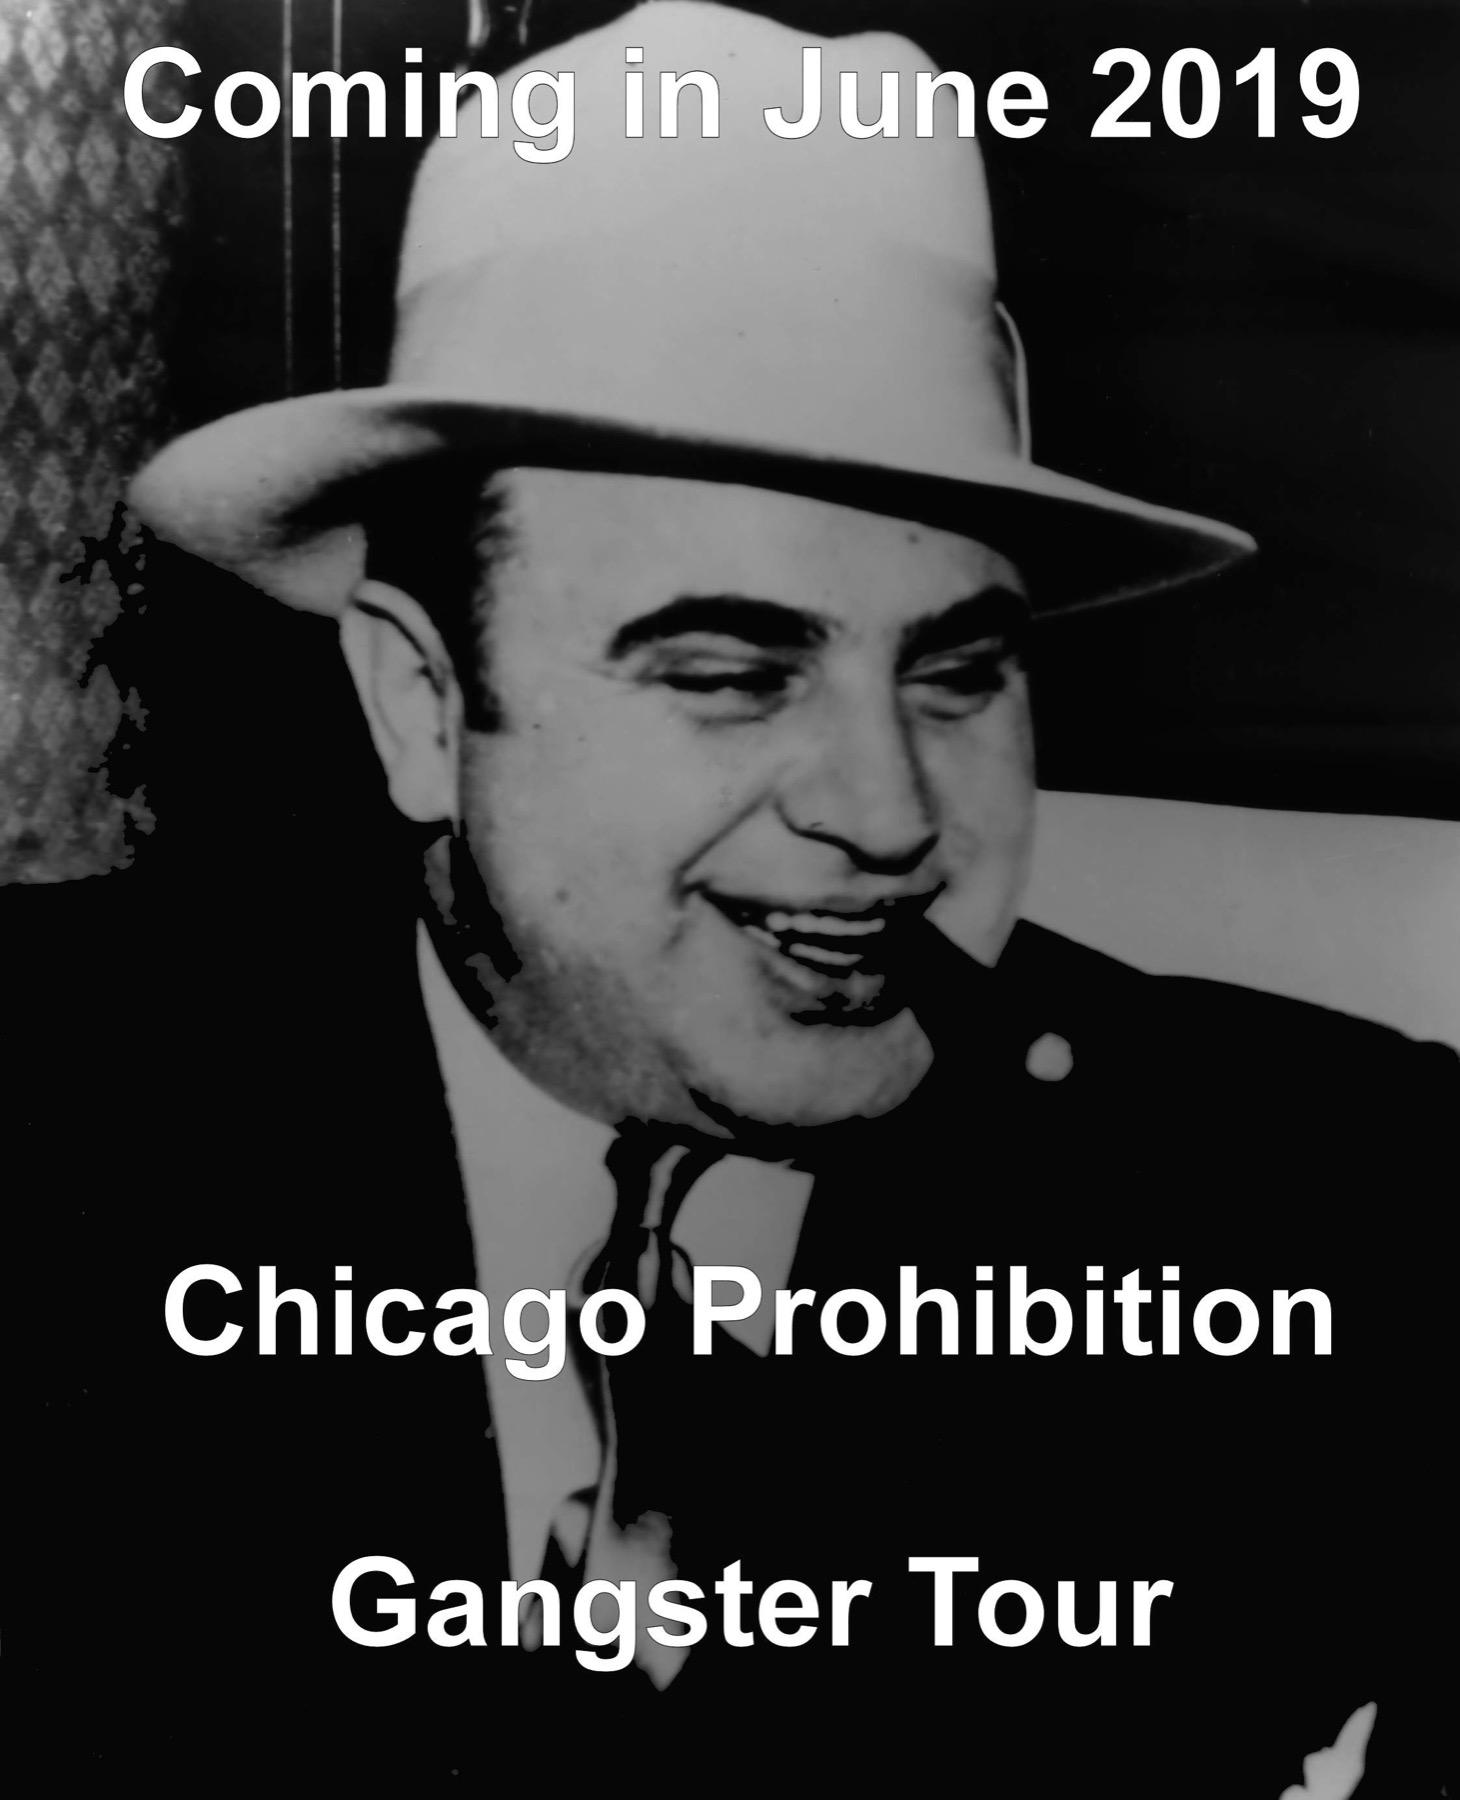 Chicago Prohibition Gangster Tour